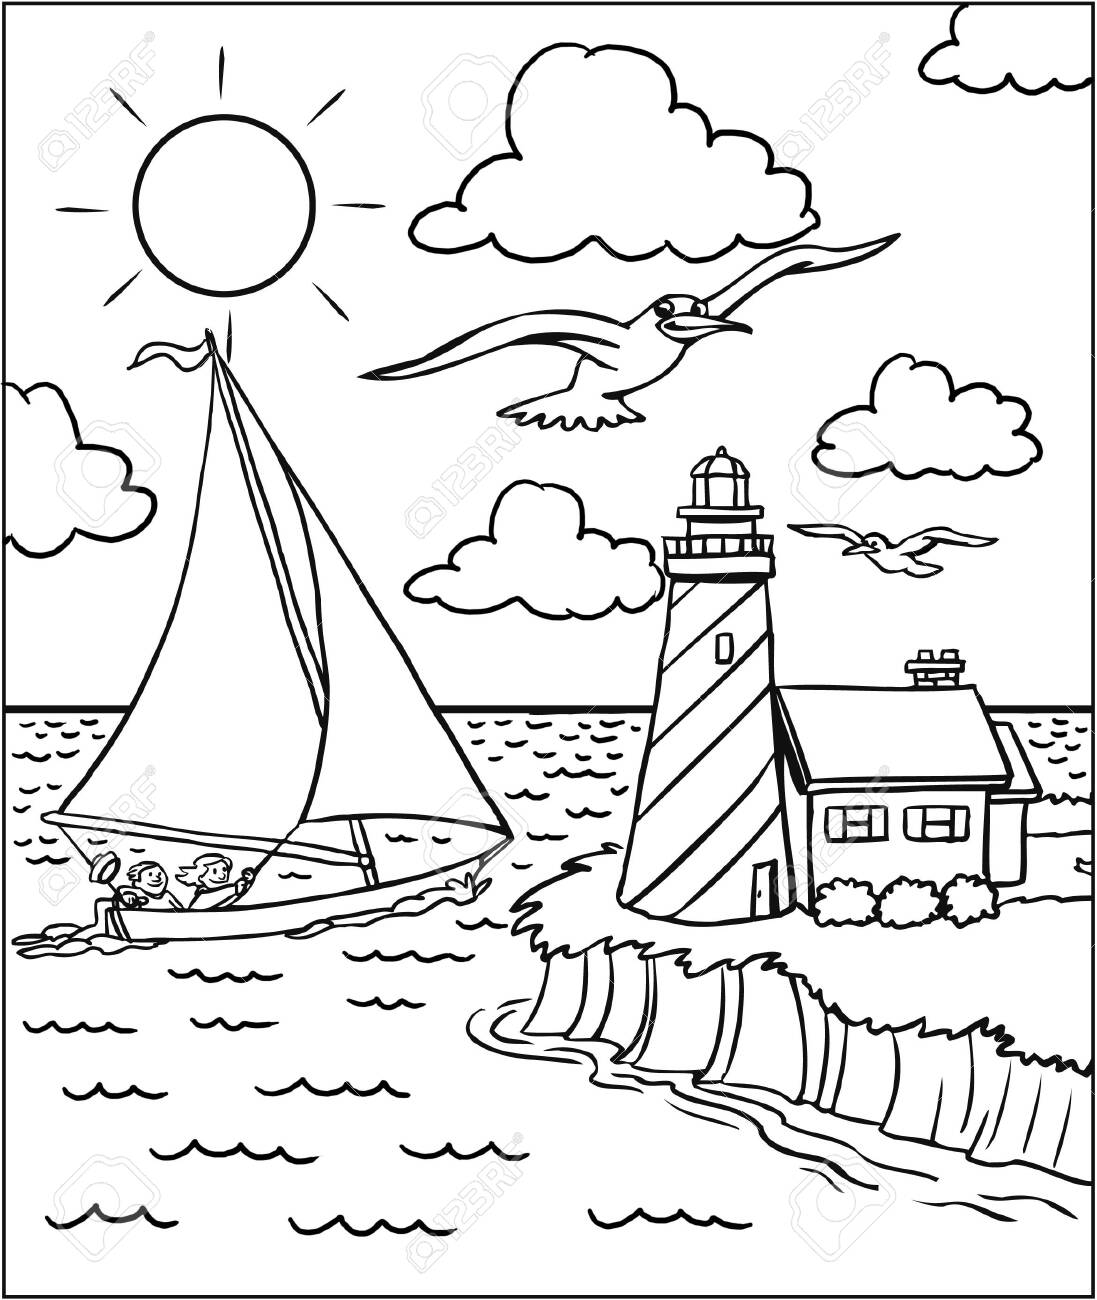 Coloring : Fabulous Sailboat Coloring Page Sailboat Coloring Page Pattern  Printable‚ Images Of Sailboat Coloring Page To Print‚ Sailboat Coloring  Sheet also Colorings